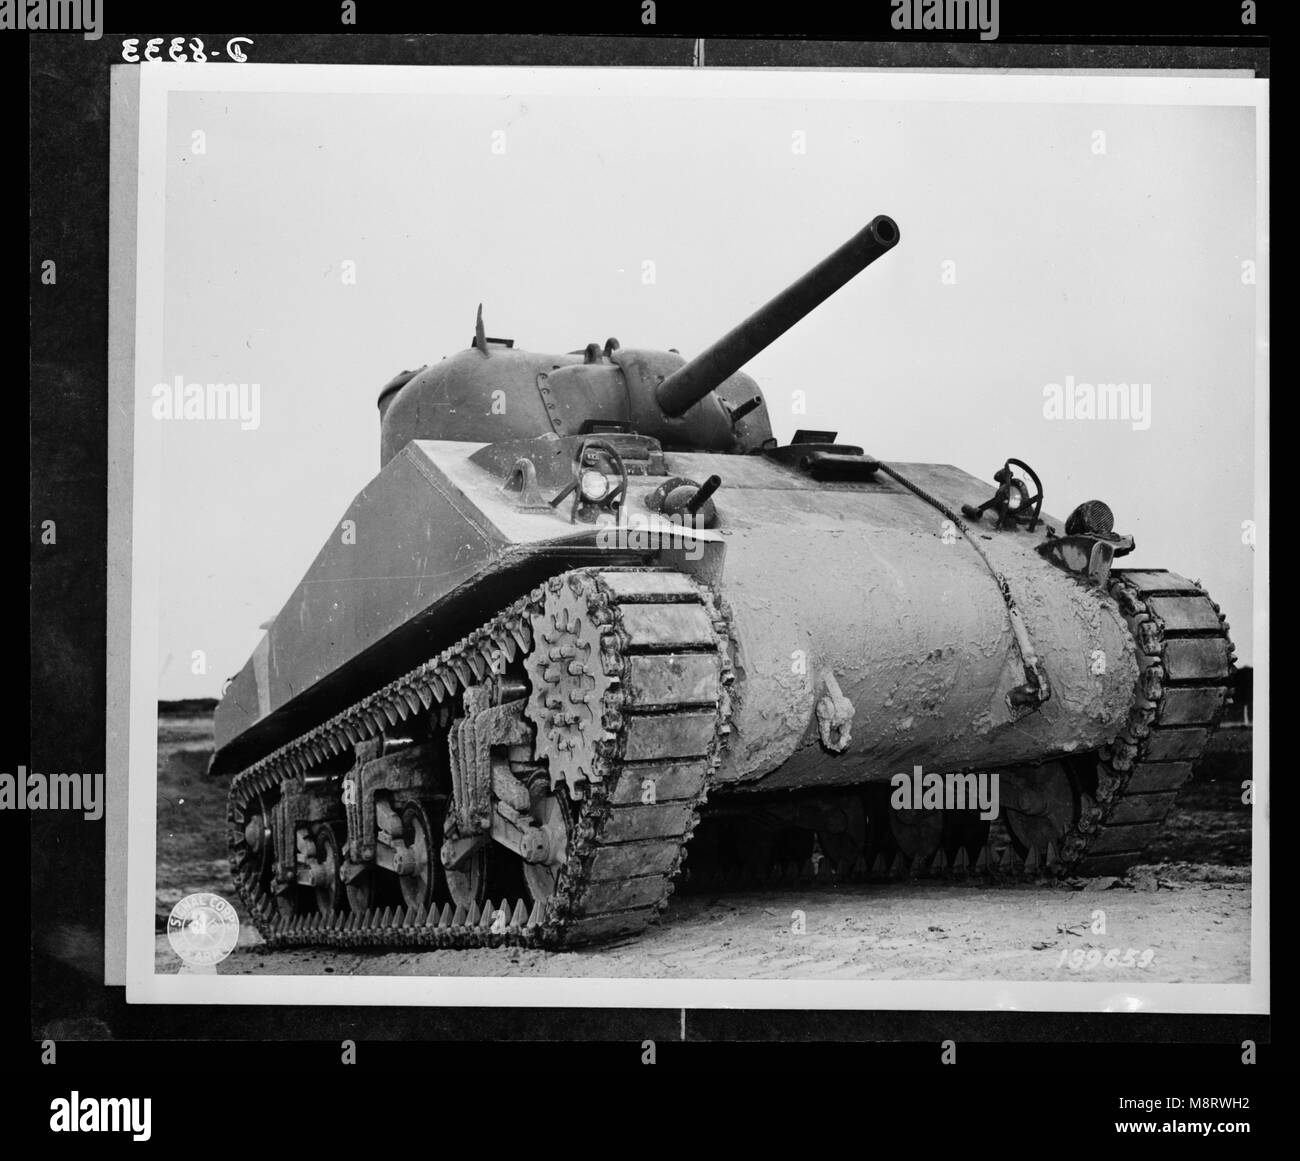 M-4 Tank during Training, Aberdeen, Maryland, USA, Office of War Information, 1940's Stock Photo